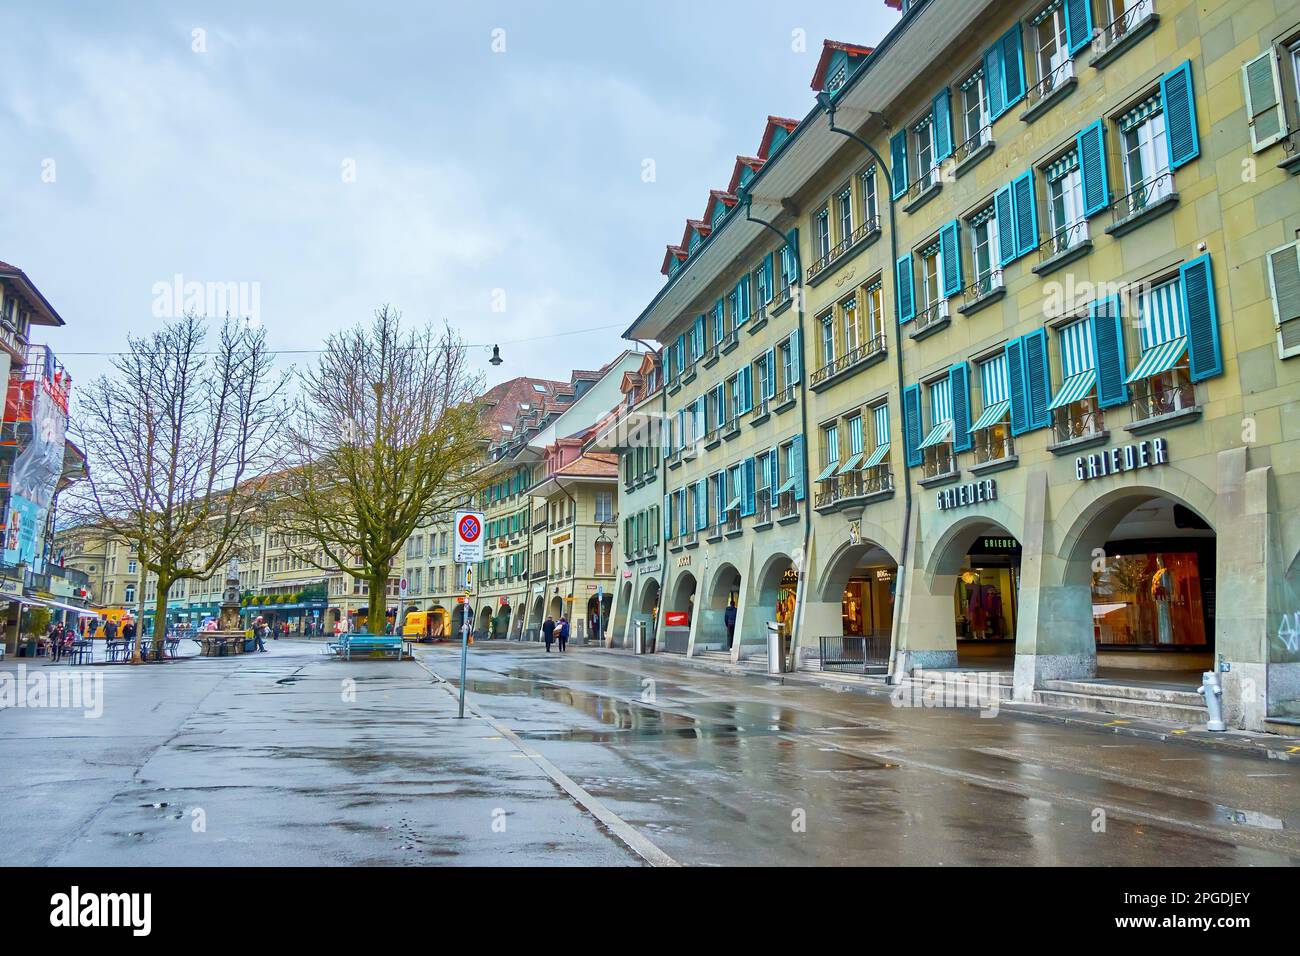 BERN, SWITZERLAND - MARCH 31, 2022: Typical Bernese townhouses with walking arcades and stores on the ground floors, on March 31 in Bern, Switzerland Stock Photo